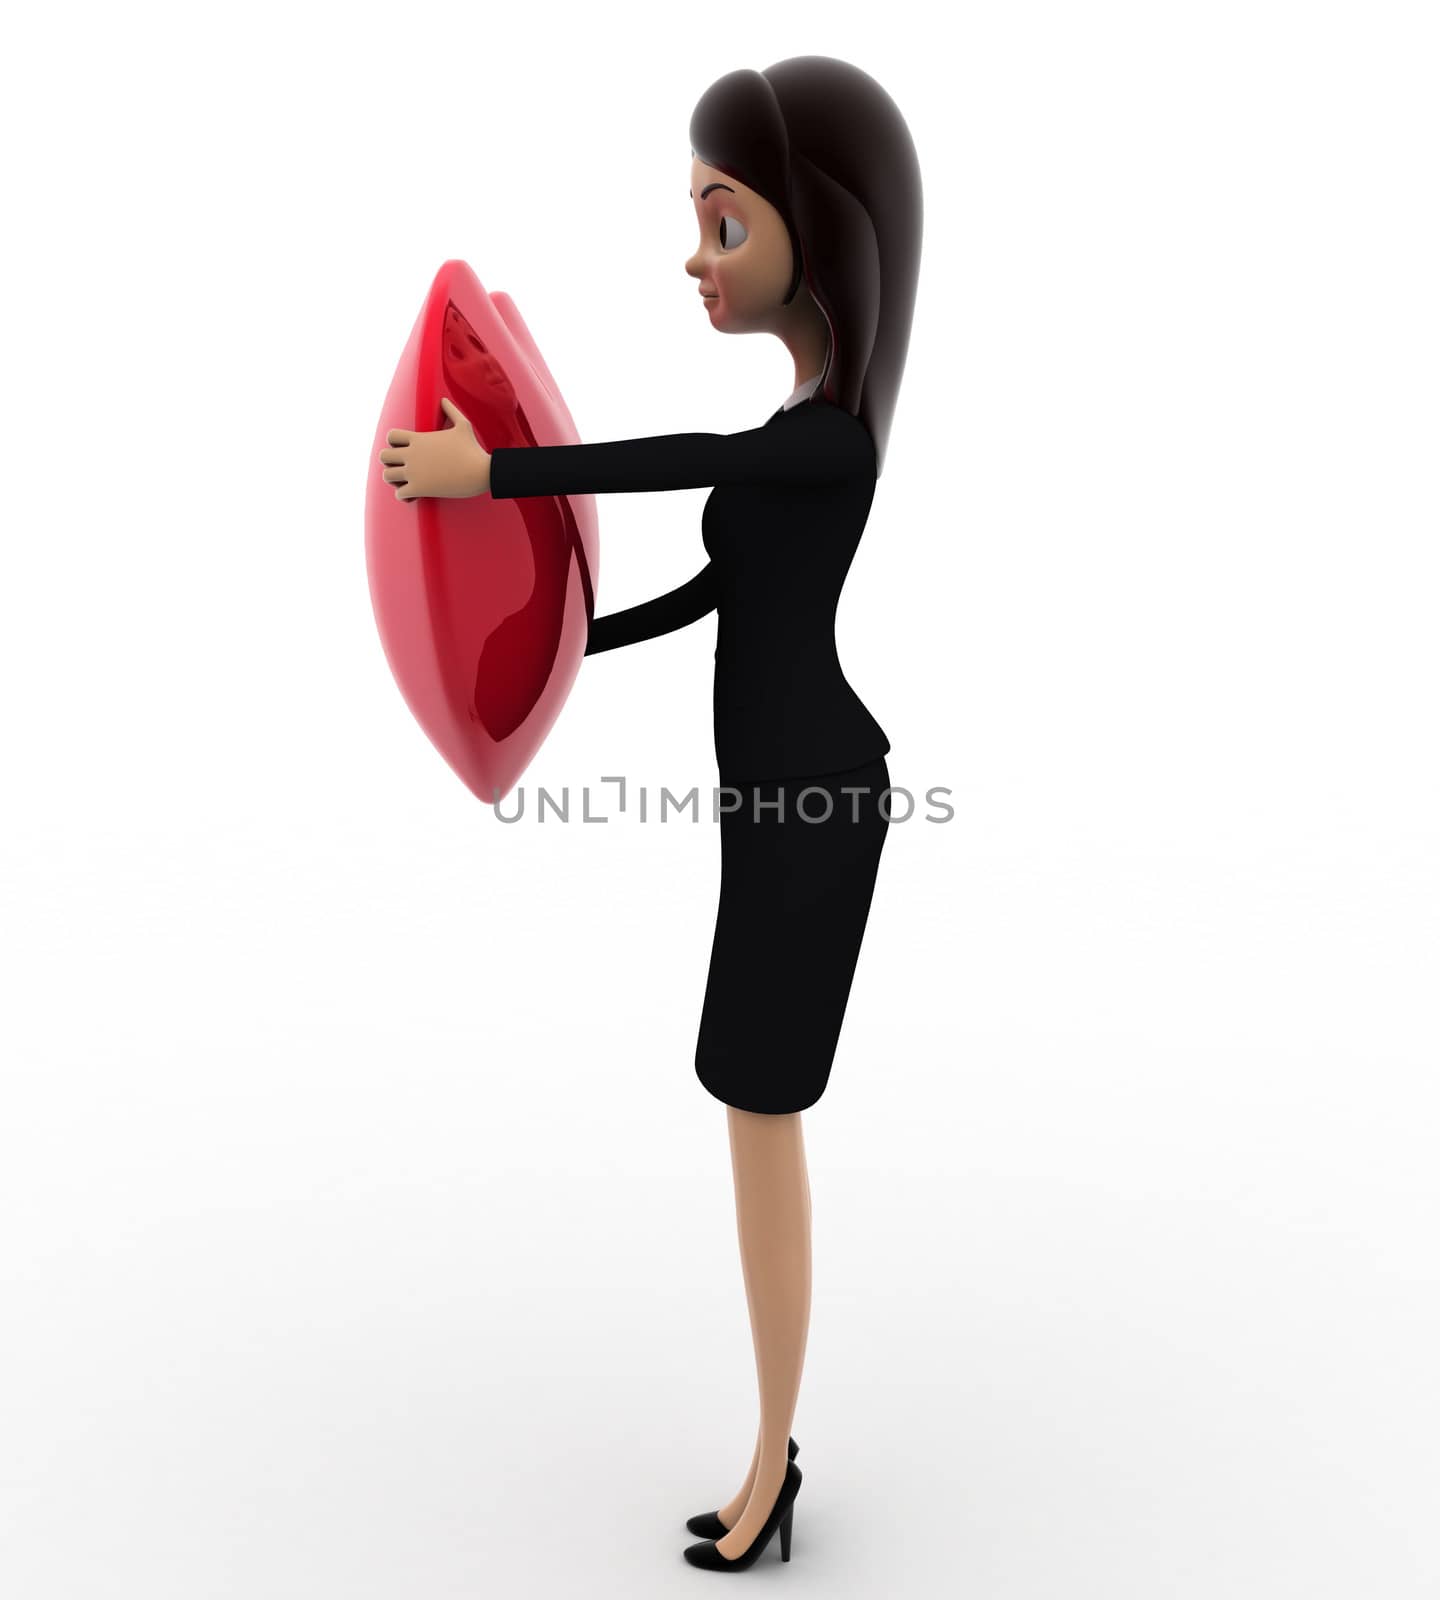 3d woman holding big red heart concept by touchmenithin@gmail.com